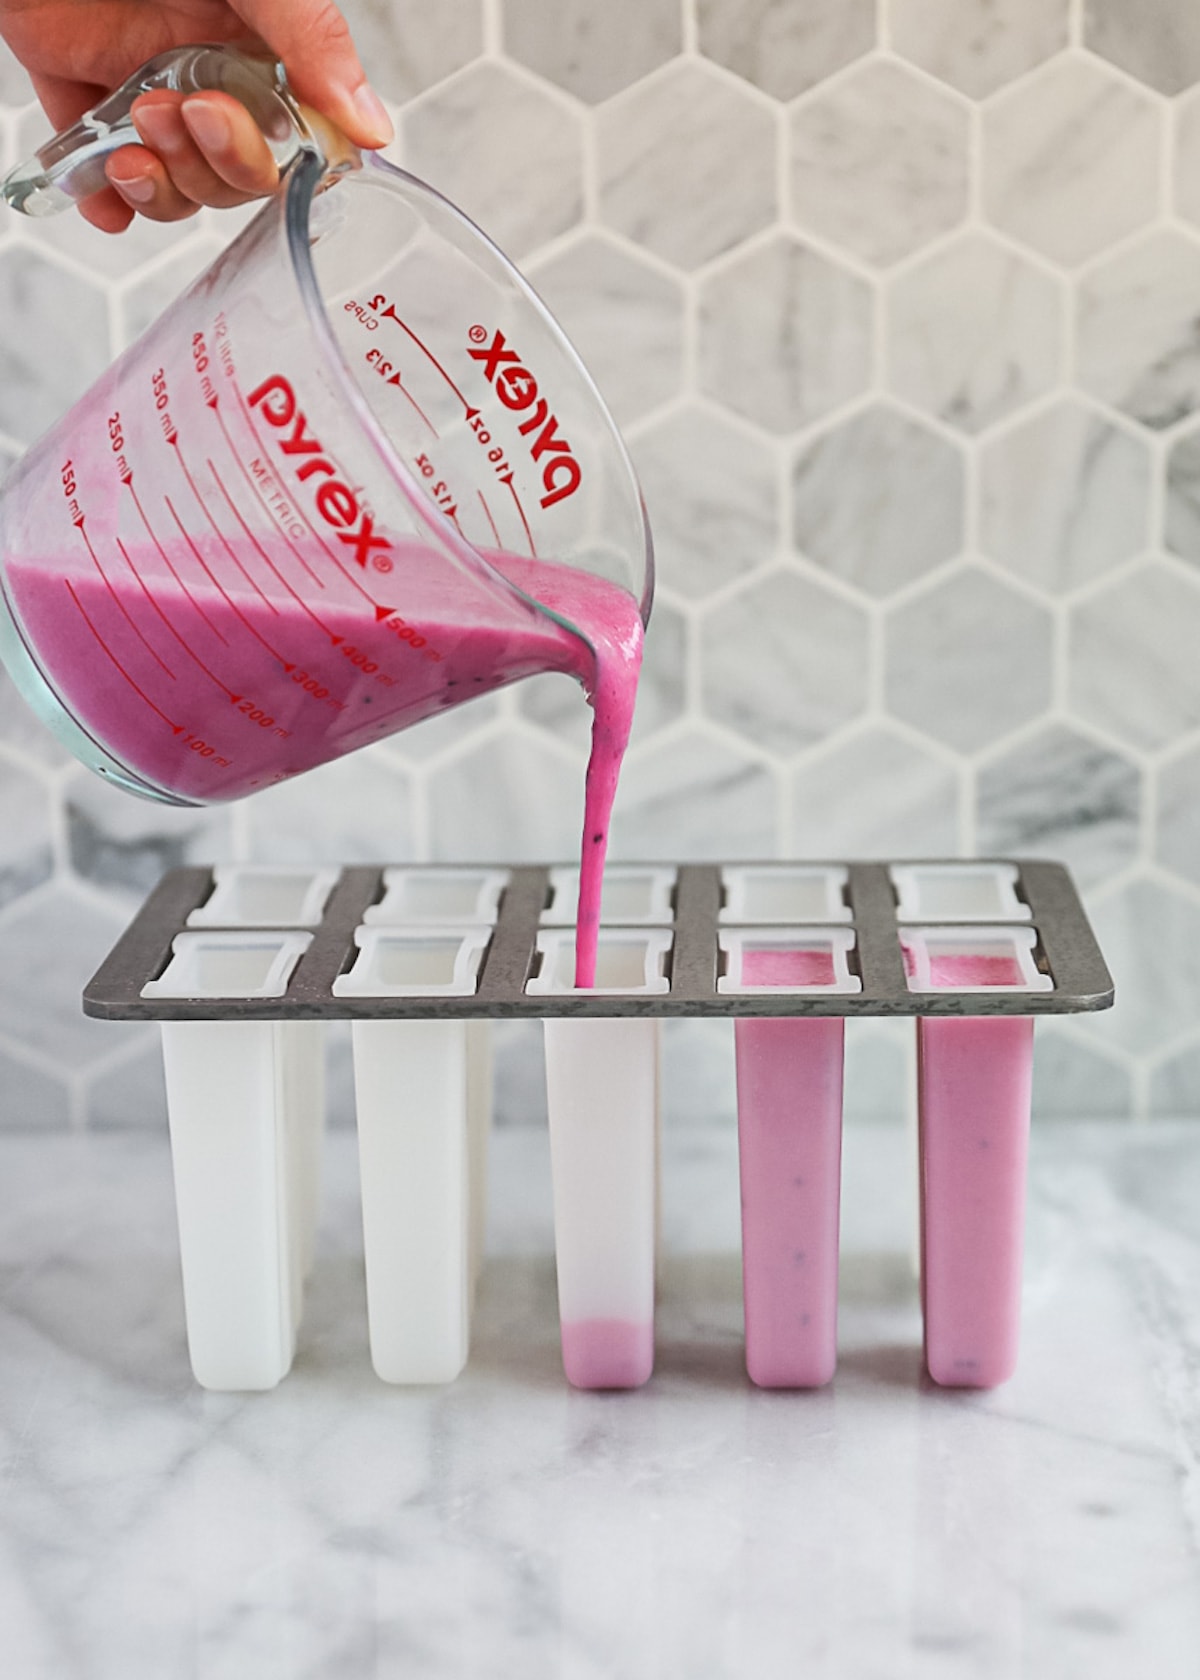 A hand holding a measuring cup that is pouring the unfrozen pink popsicles into popsicle molds.